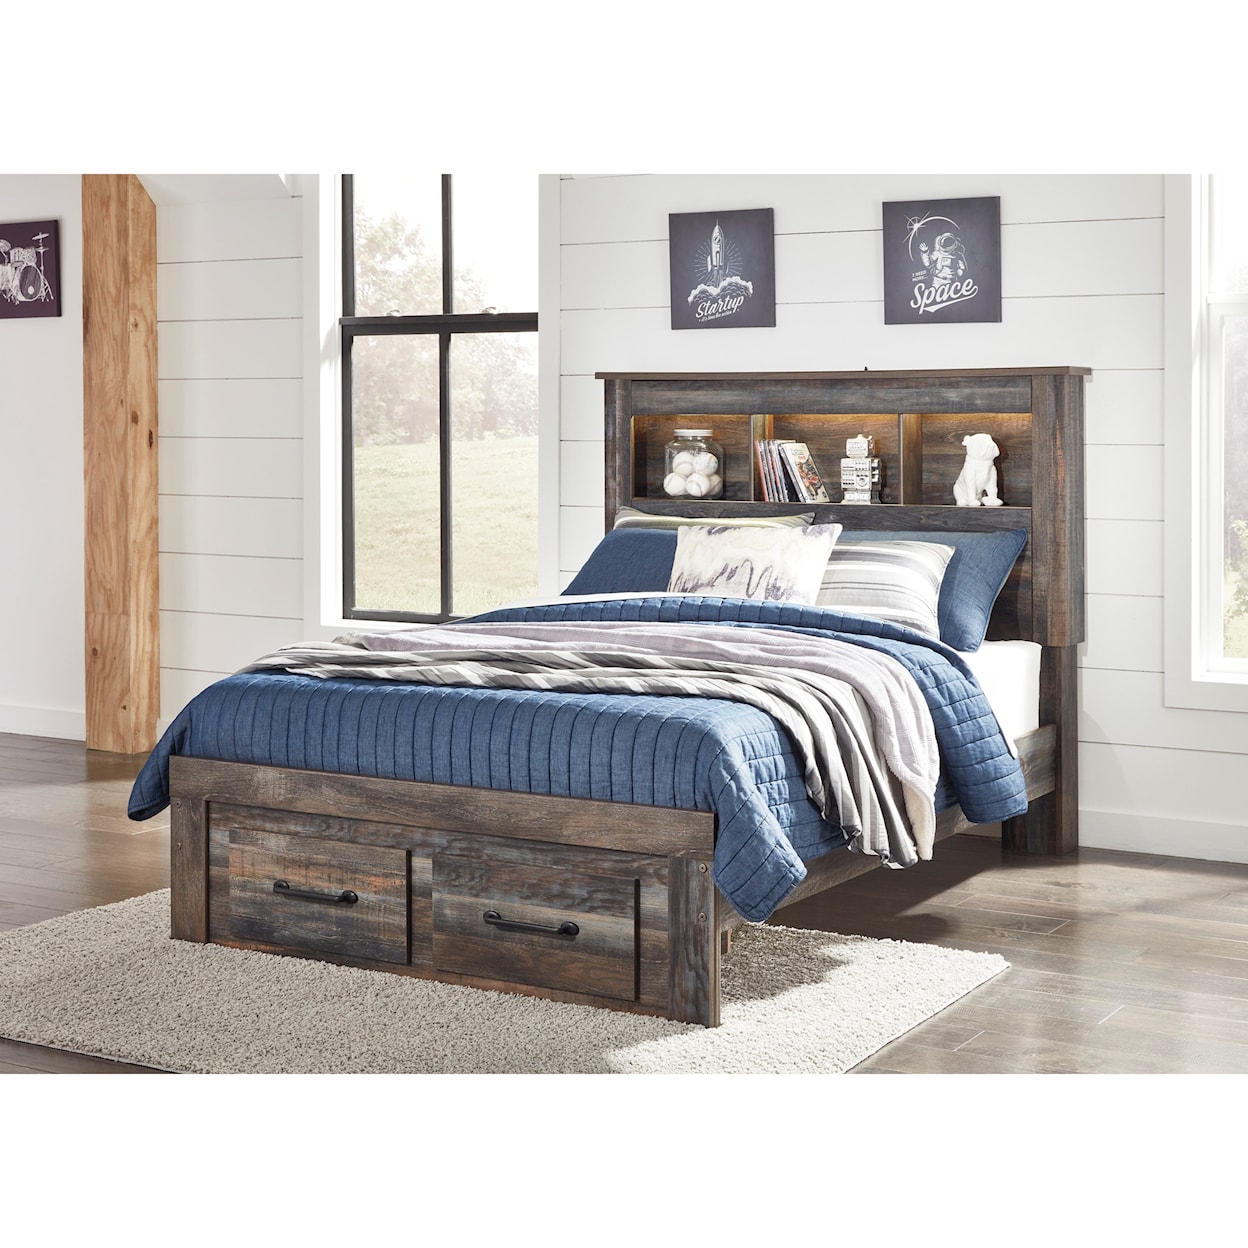 Ashley Furniture Signature Design Drystan Full Bookcase Bed with Footboard Drawers